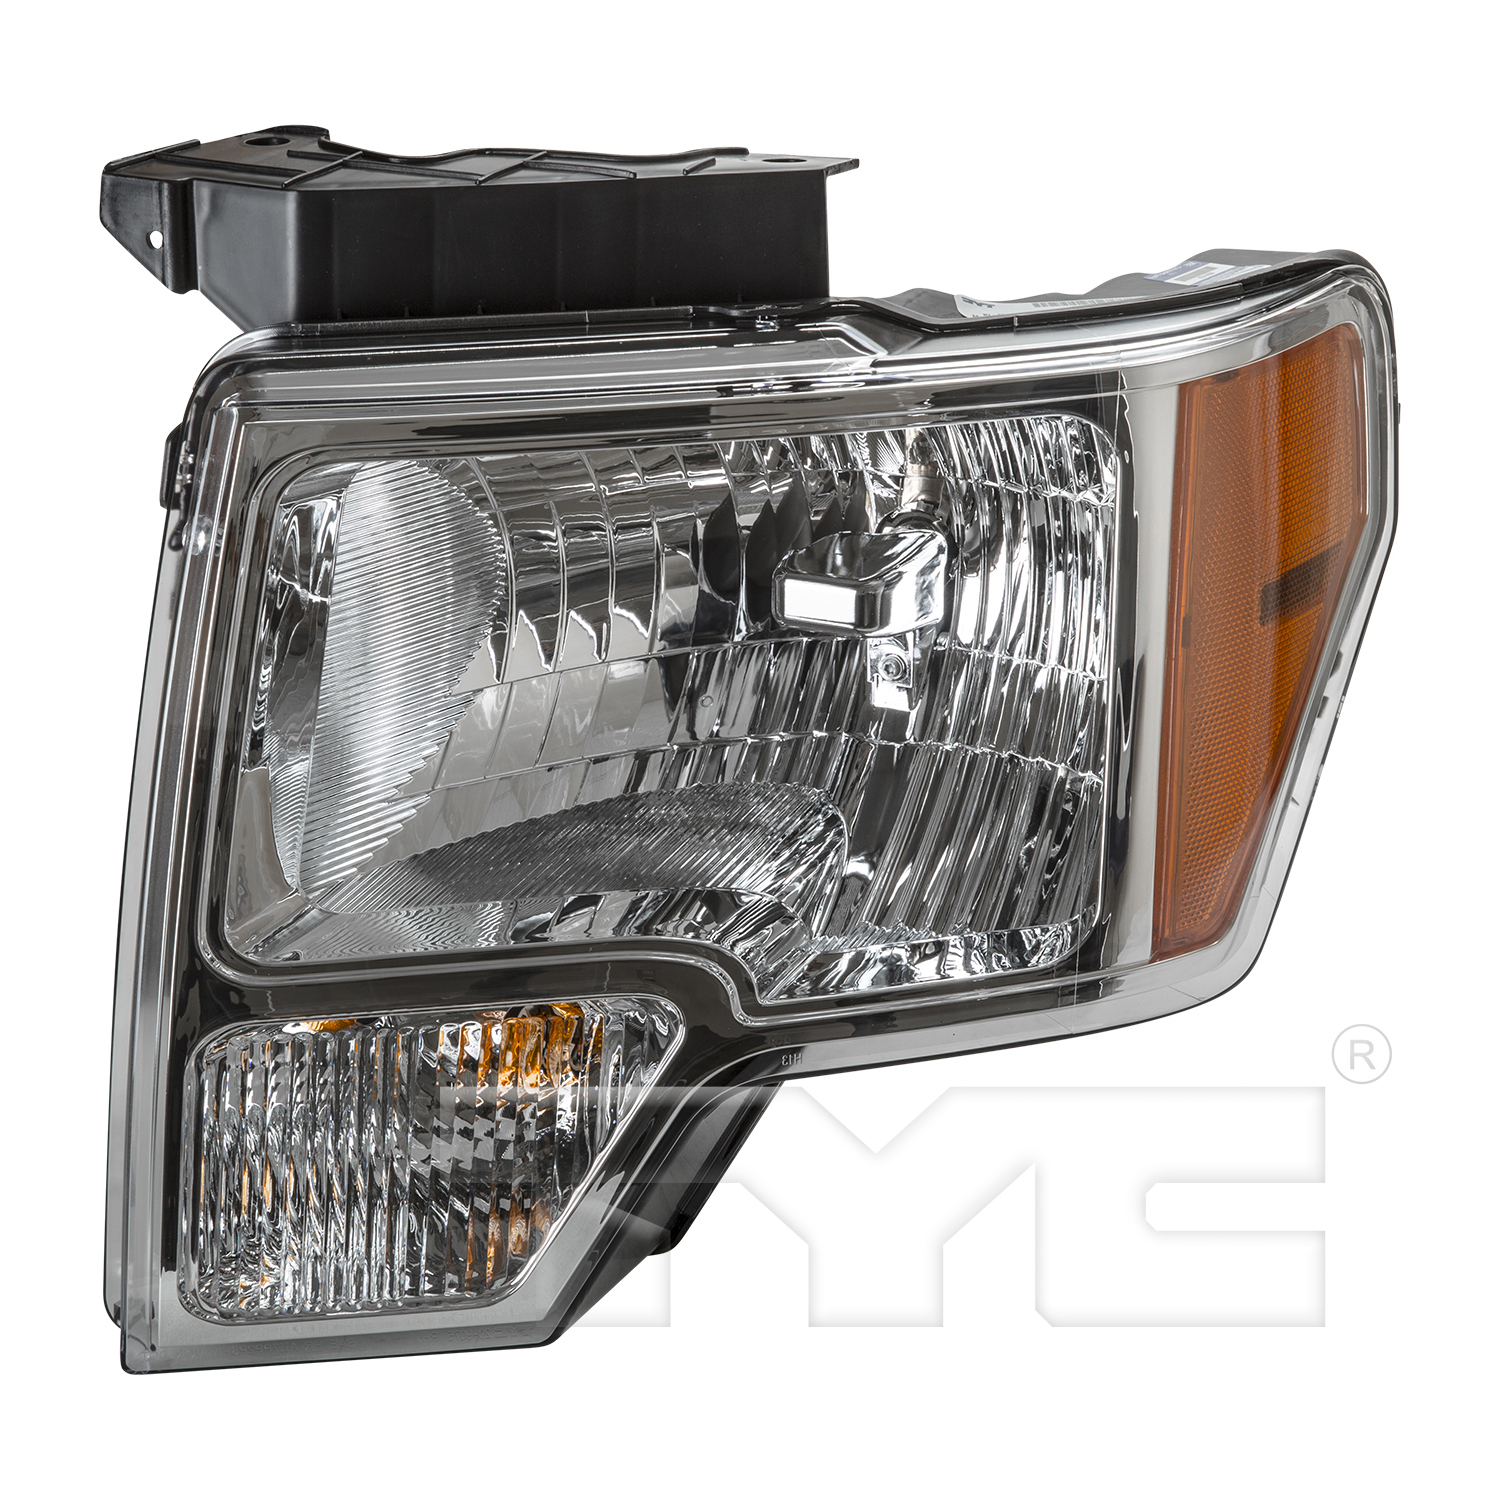 Aftermarket HEADLIGHTS for FORD - F-150, F-150,09-14,LT Headlamp assy composite